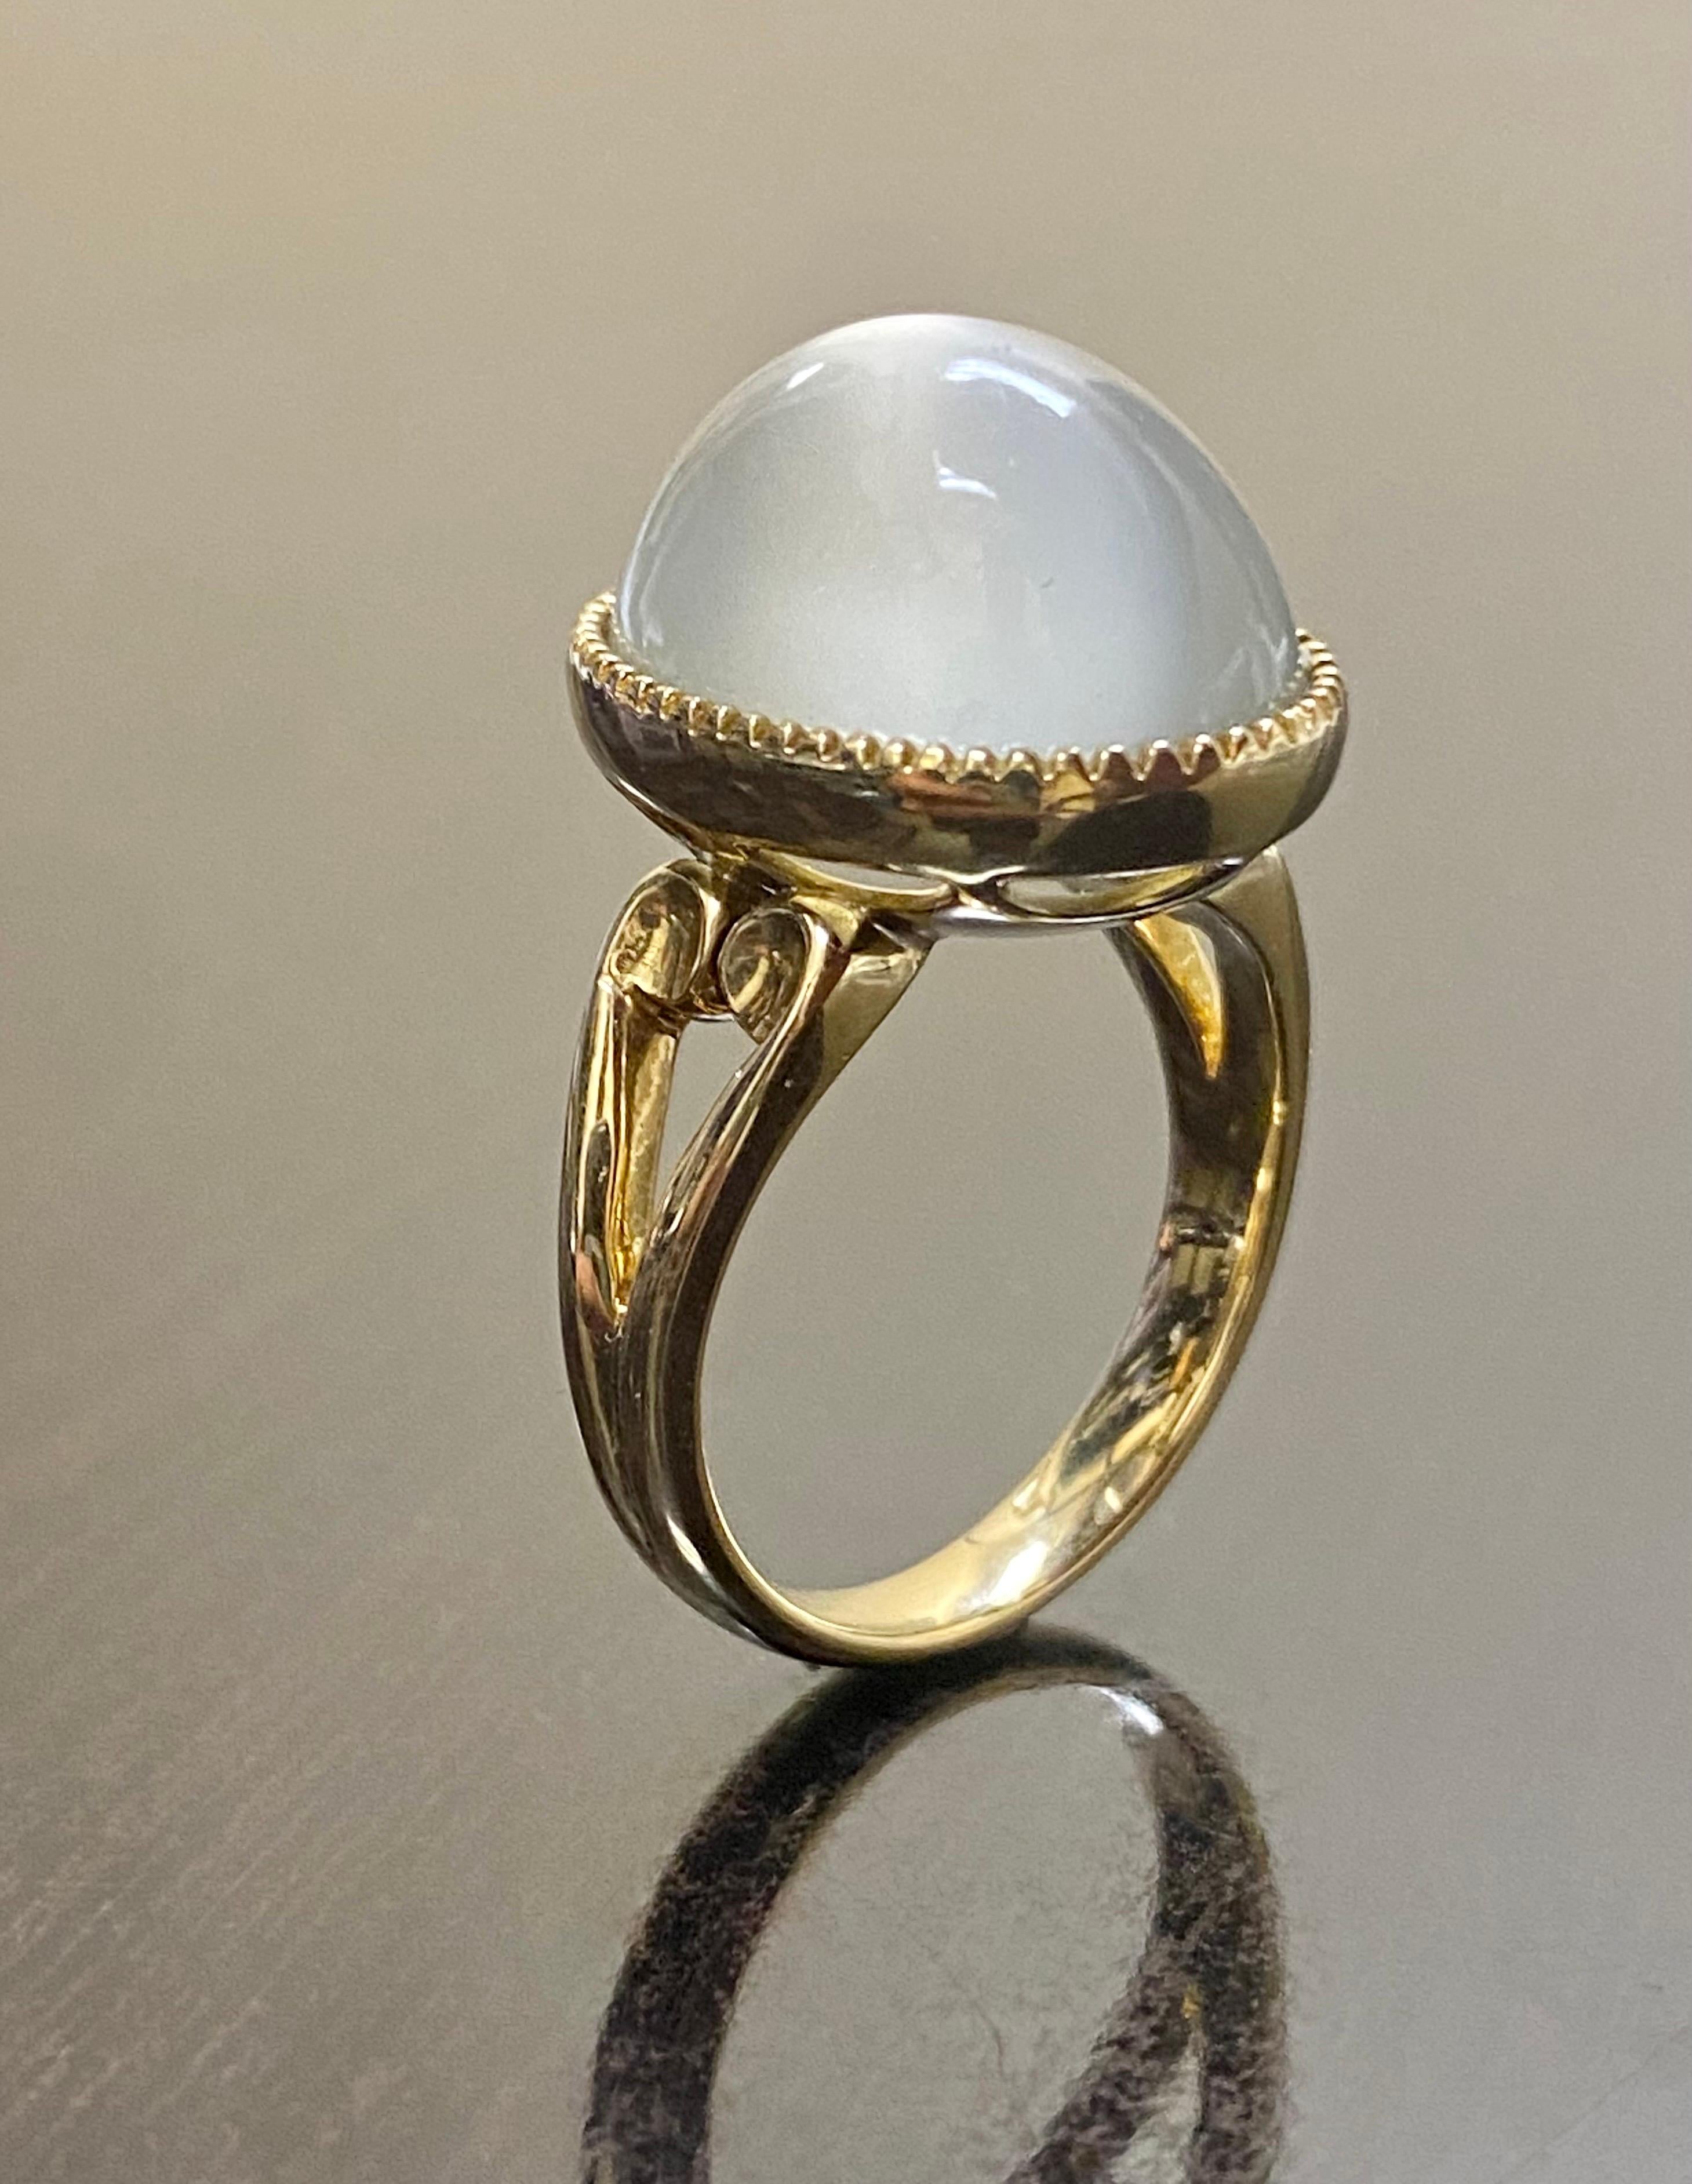 DeKara Designs Collection

Art Deco Inspired Extremely Elegant Handmade Oval Cabochon Moonstone Engagement Ring.

Metal- 18K Yellow Gold, .750.

Stones- 1 Genuine Oval Cabochon Moonstone 19.67 Carats.

Size- 8 3/4. FREE SIZING!!!!

An Amazing One of